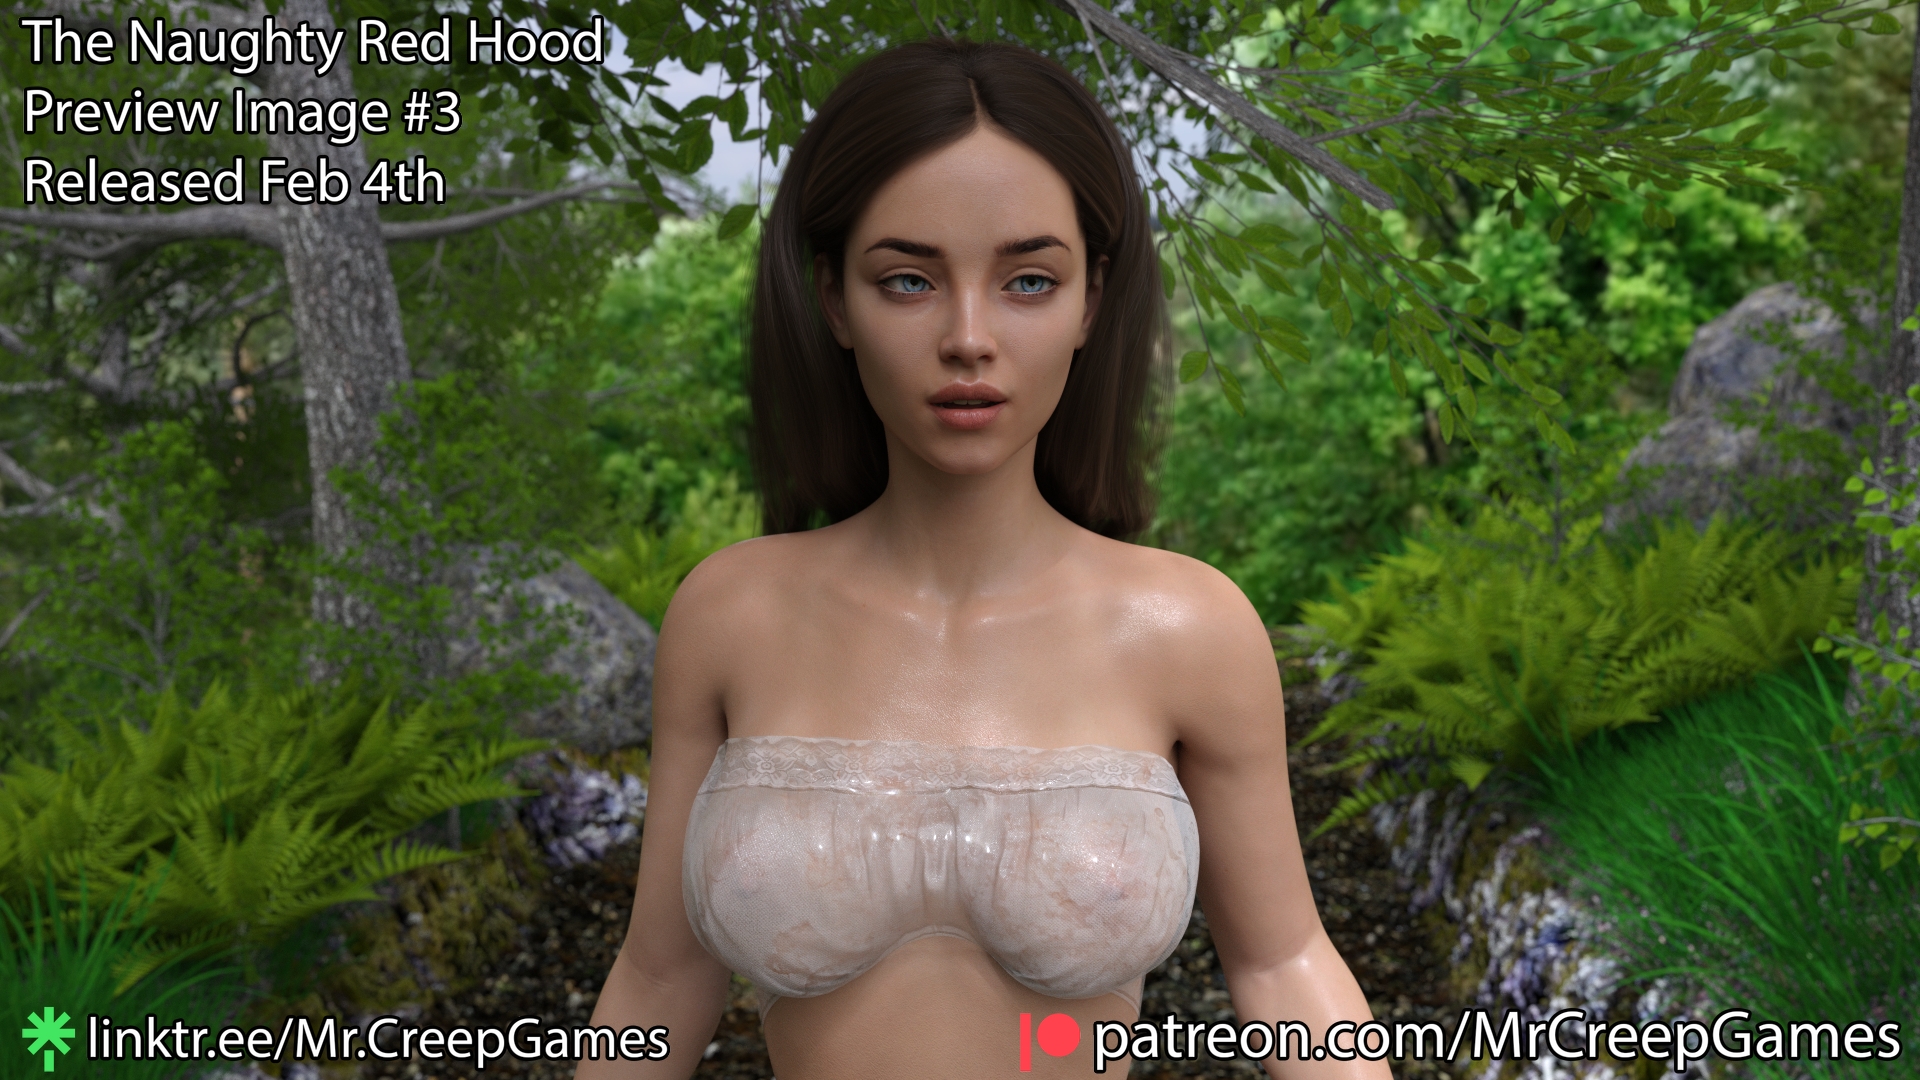 The Naughty Red Hood Preview #3  3d Porn 3d Girl Nsfw 3dnsfw Sexy Hot Nude Big boobs Pinup Pose Cute Teen